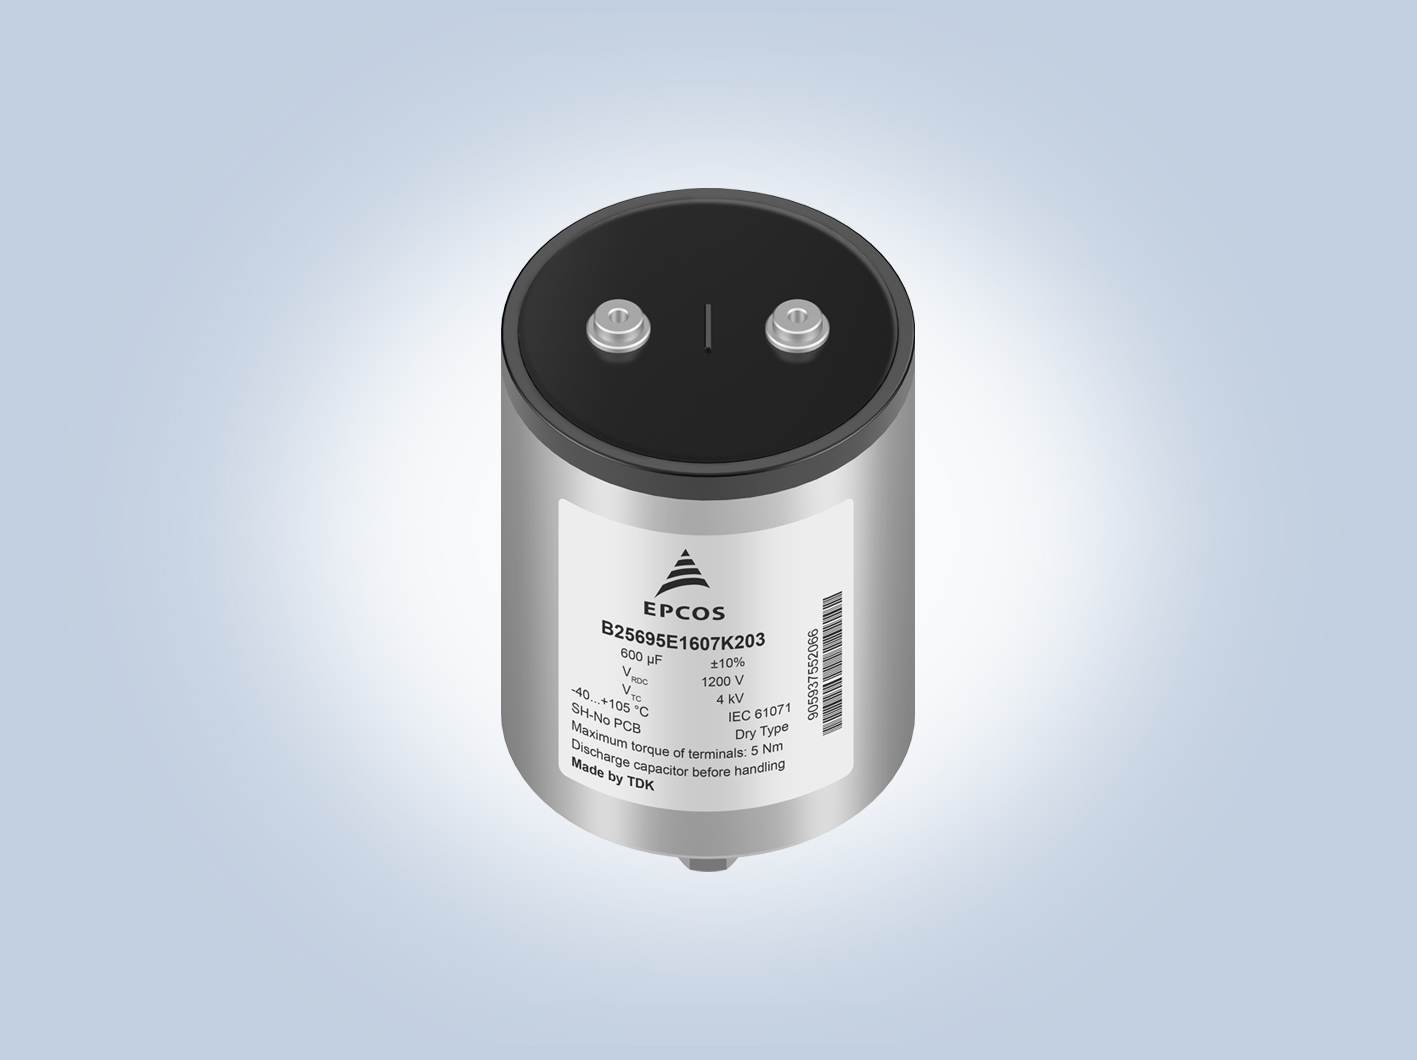 TDK Offers DC link Capacitors for +105°C